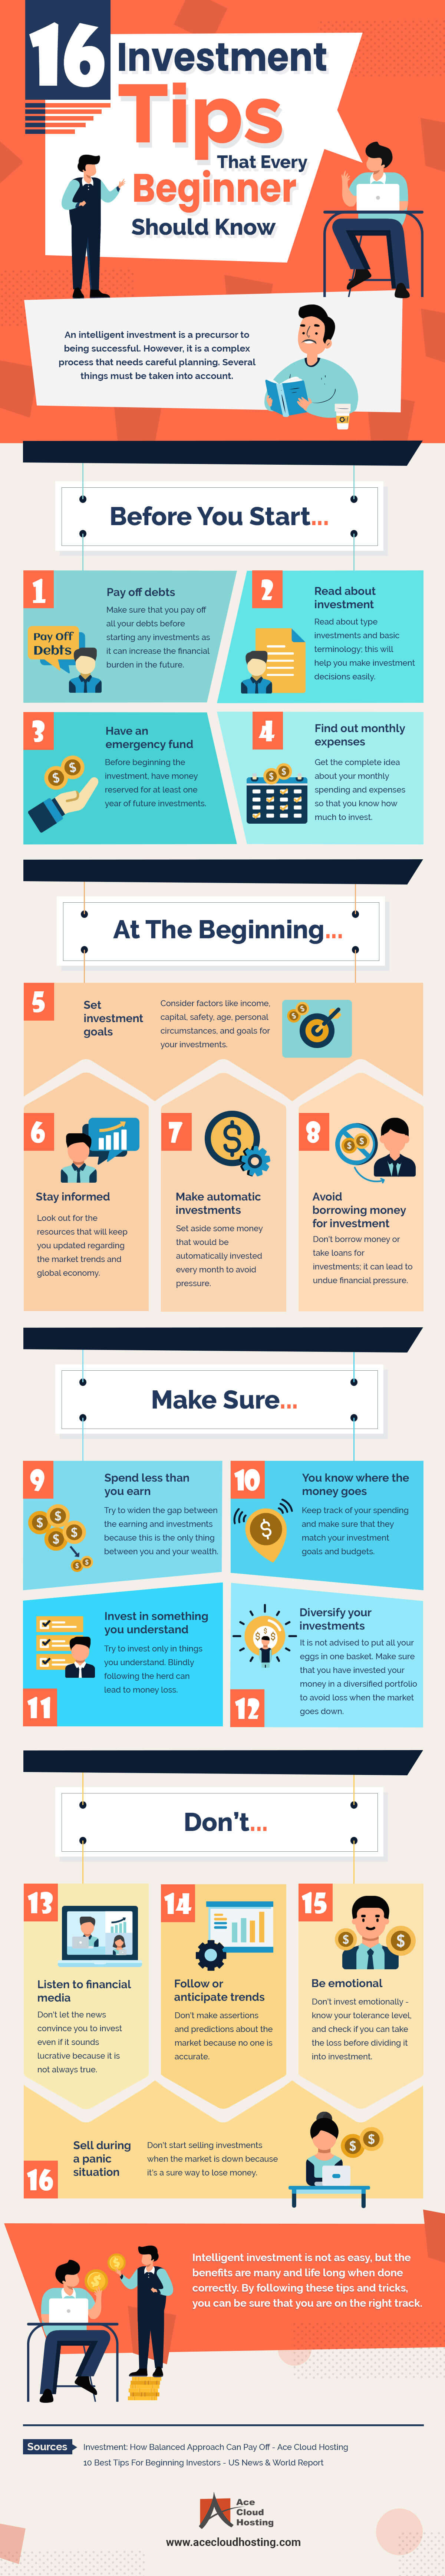 16 Investment Tips That Every Beginner Should Know [Infographic]